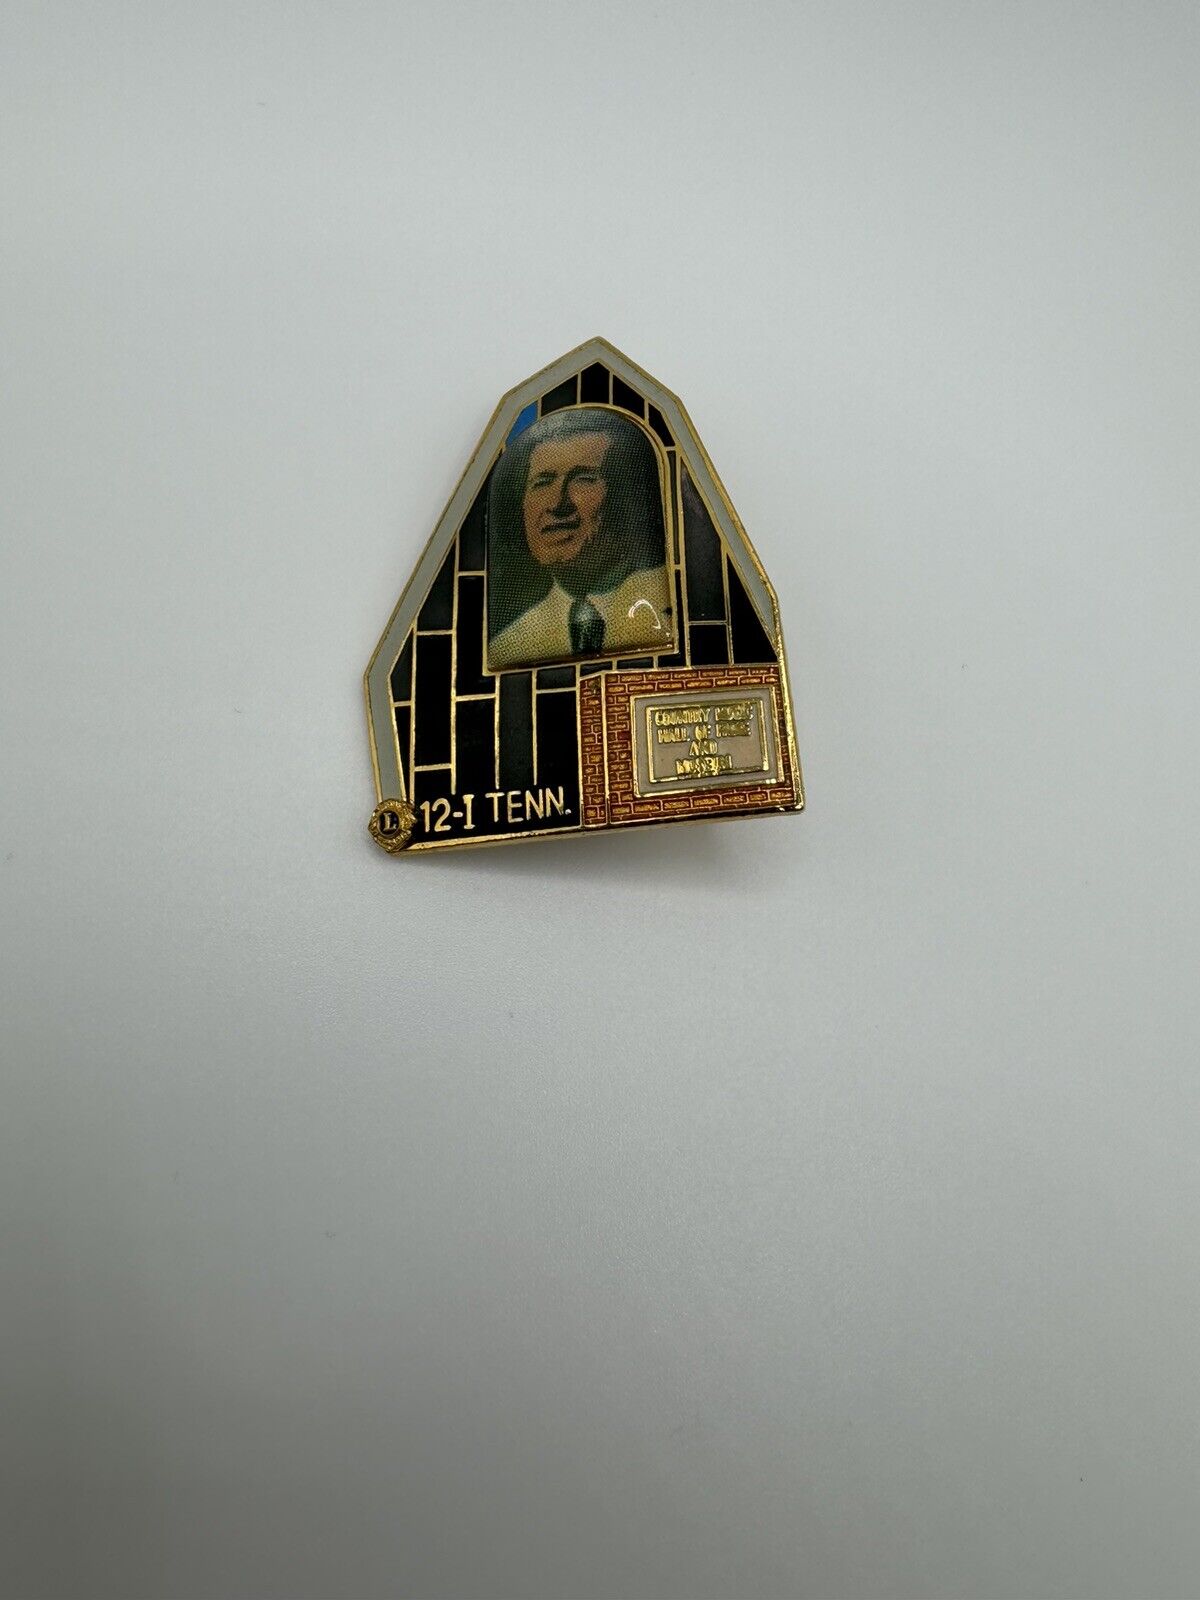 Vintage Lions Club Pins - MEMBER OF THE COUNTRY MUSIC HALL OF FAME